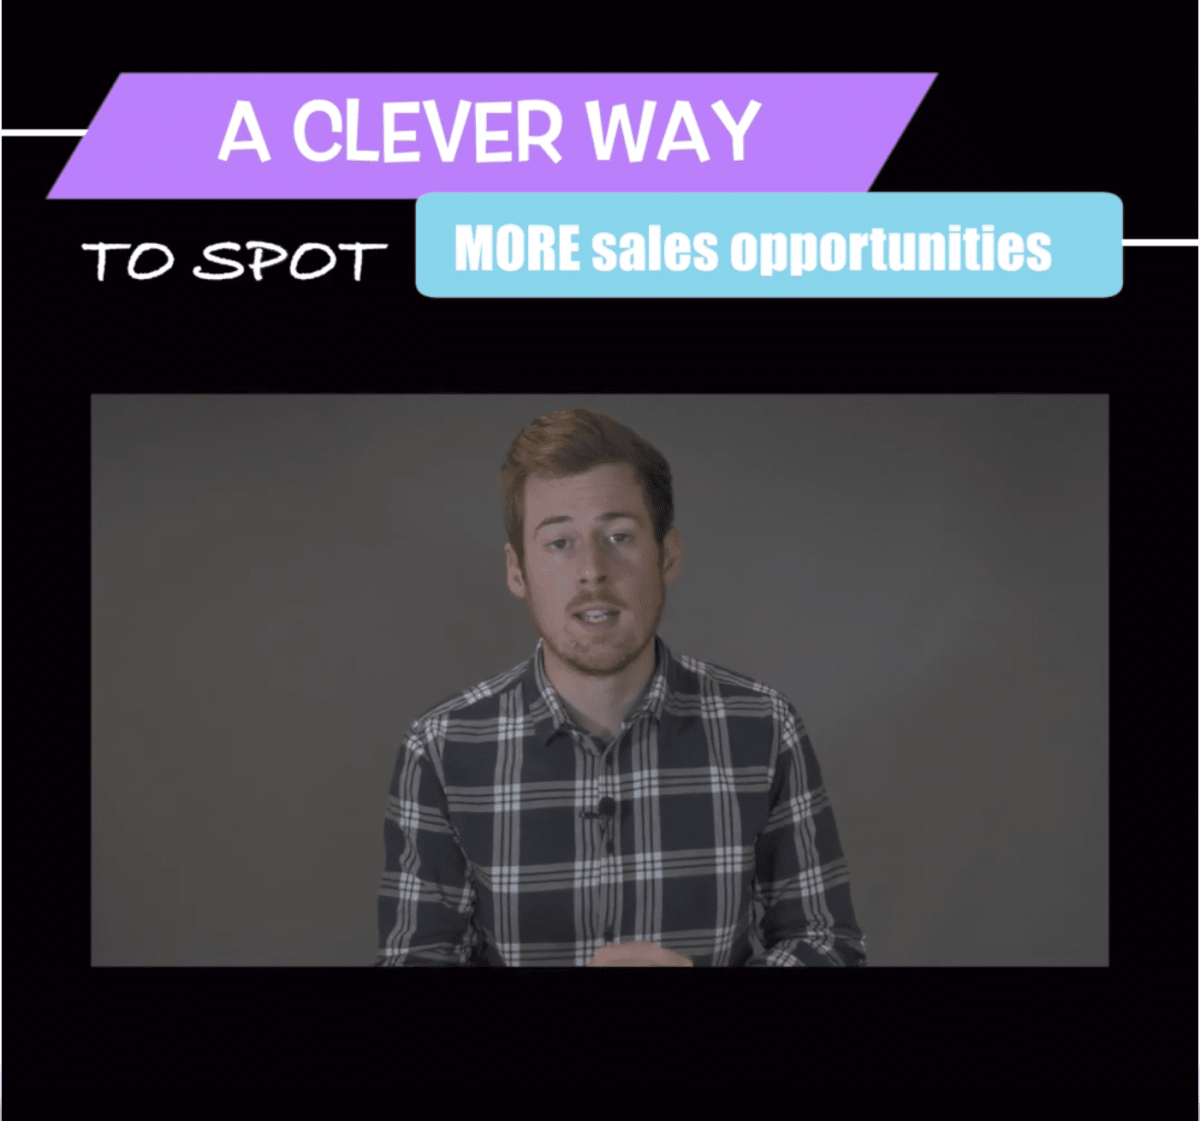 A clever way to spot more sales opportunities with Flo marketing